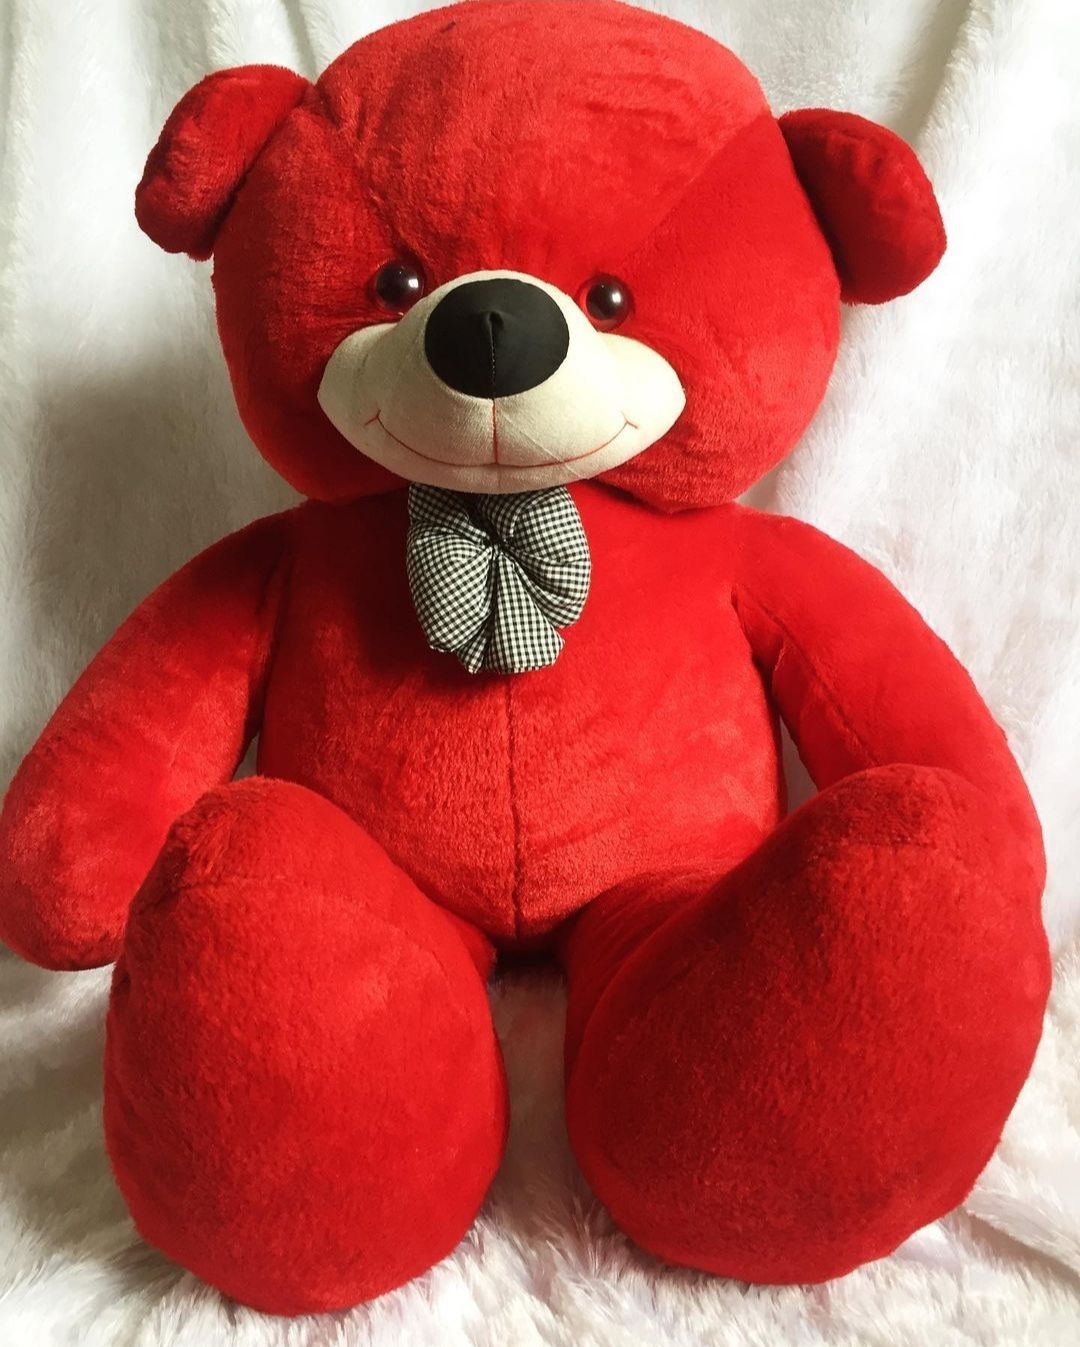 Teddy Bear Soft Dolls: Buy Online at Best Prices in Nepal 